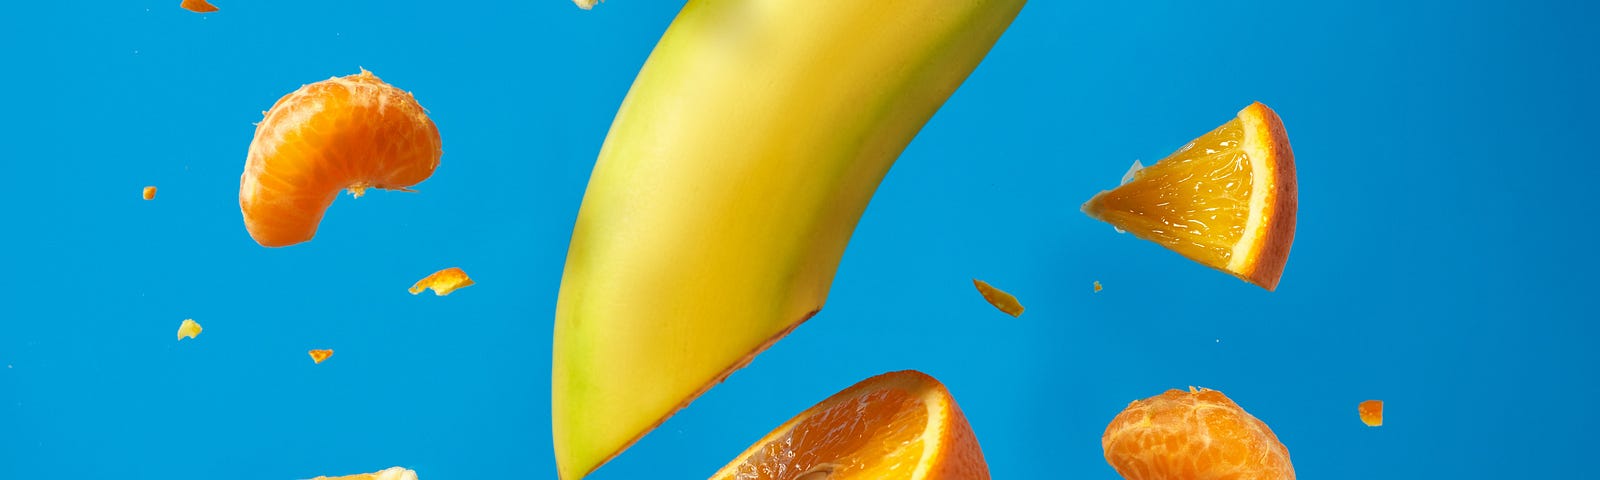 A banana, its end shaped like a dolphin grasping a grape, is surrounded by floating pieces of an orange. Blue background. Cancer remains complex and enigmatic. So many of us have worked for decades to discover effective strategies for cancer prevention.